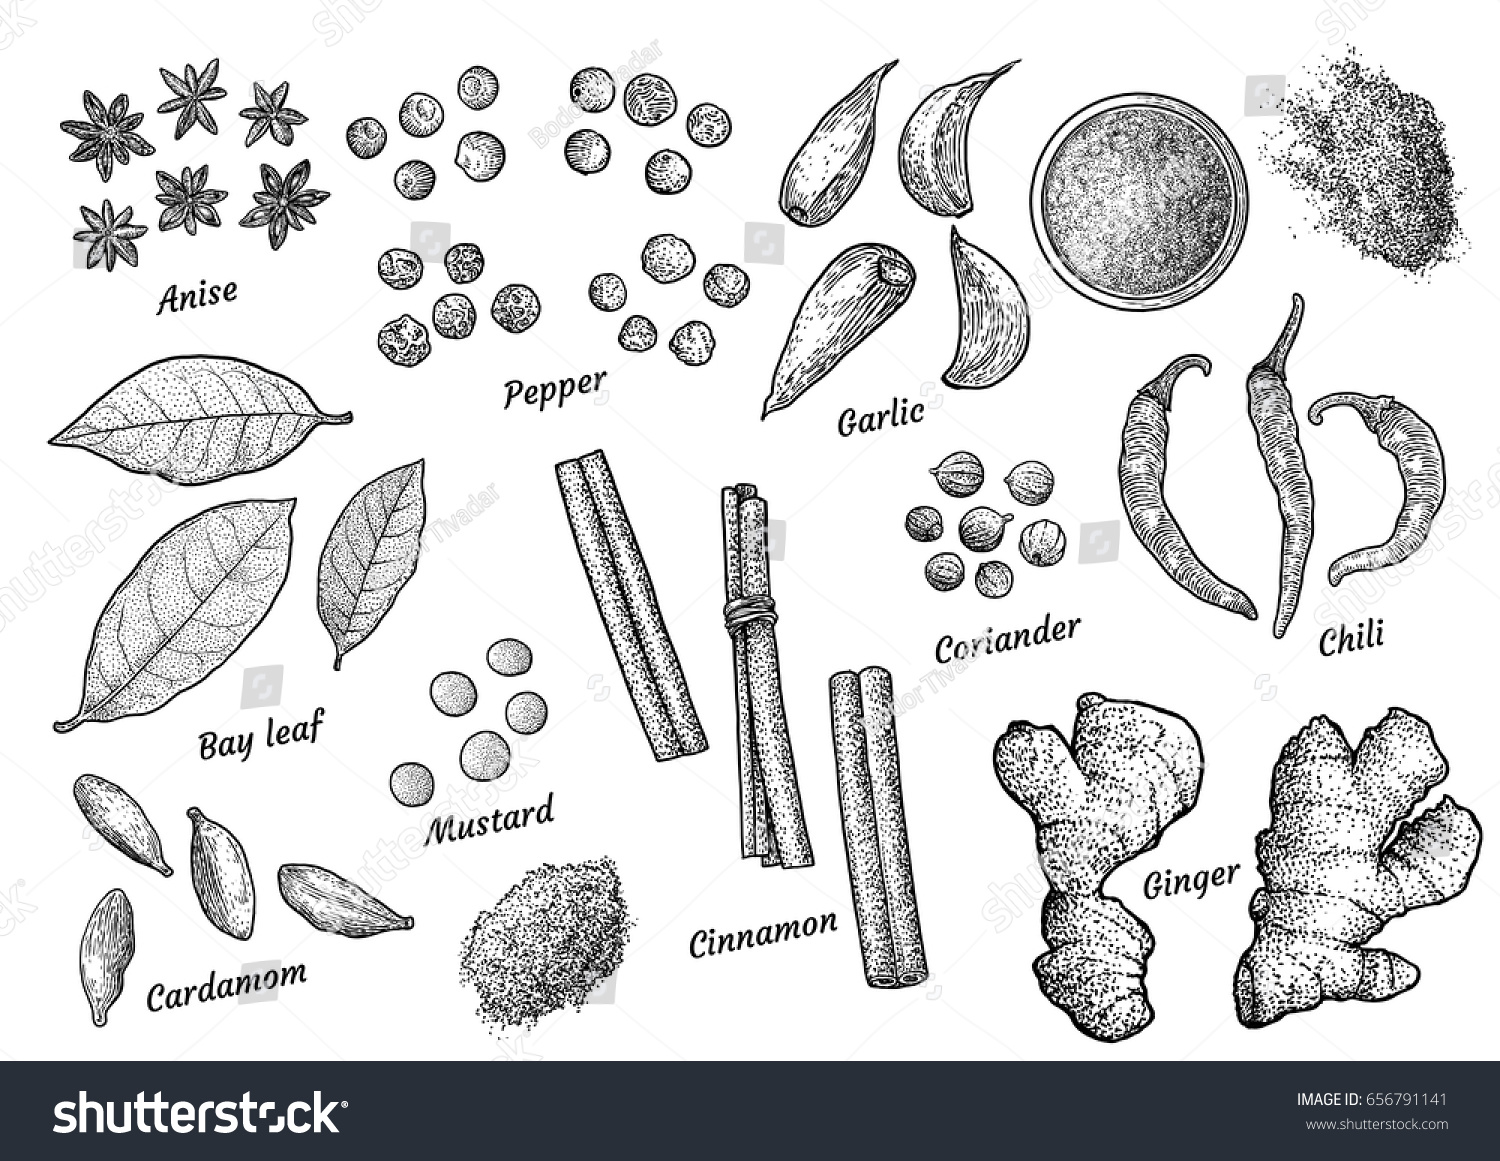 Spice collection illustration, drawing, engraving, ink, line art, vector #656791141